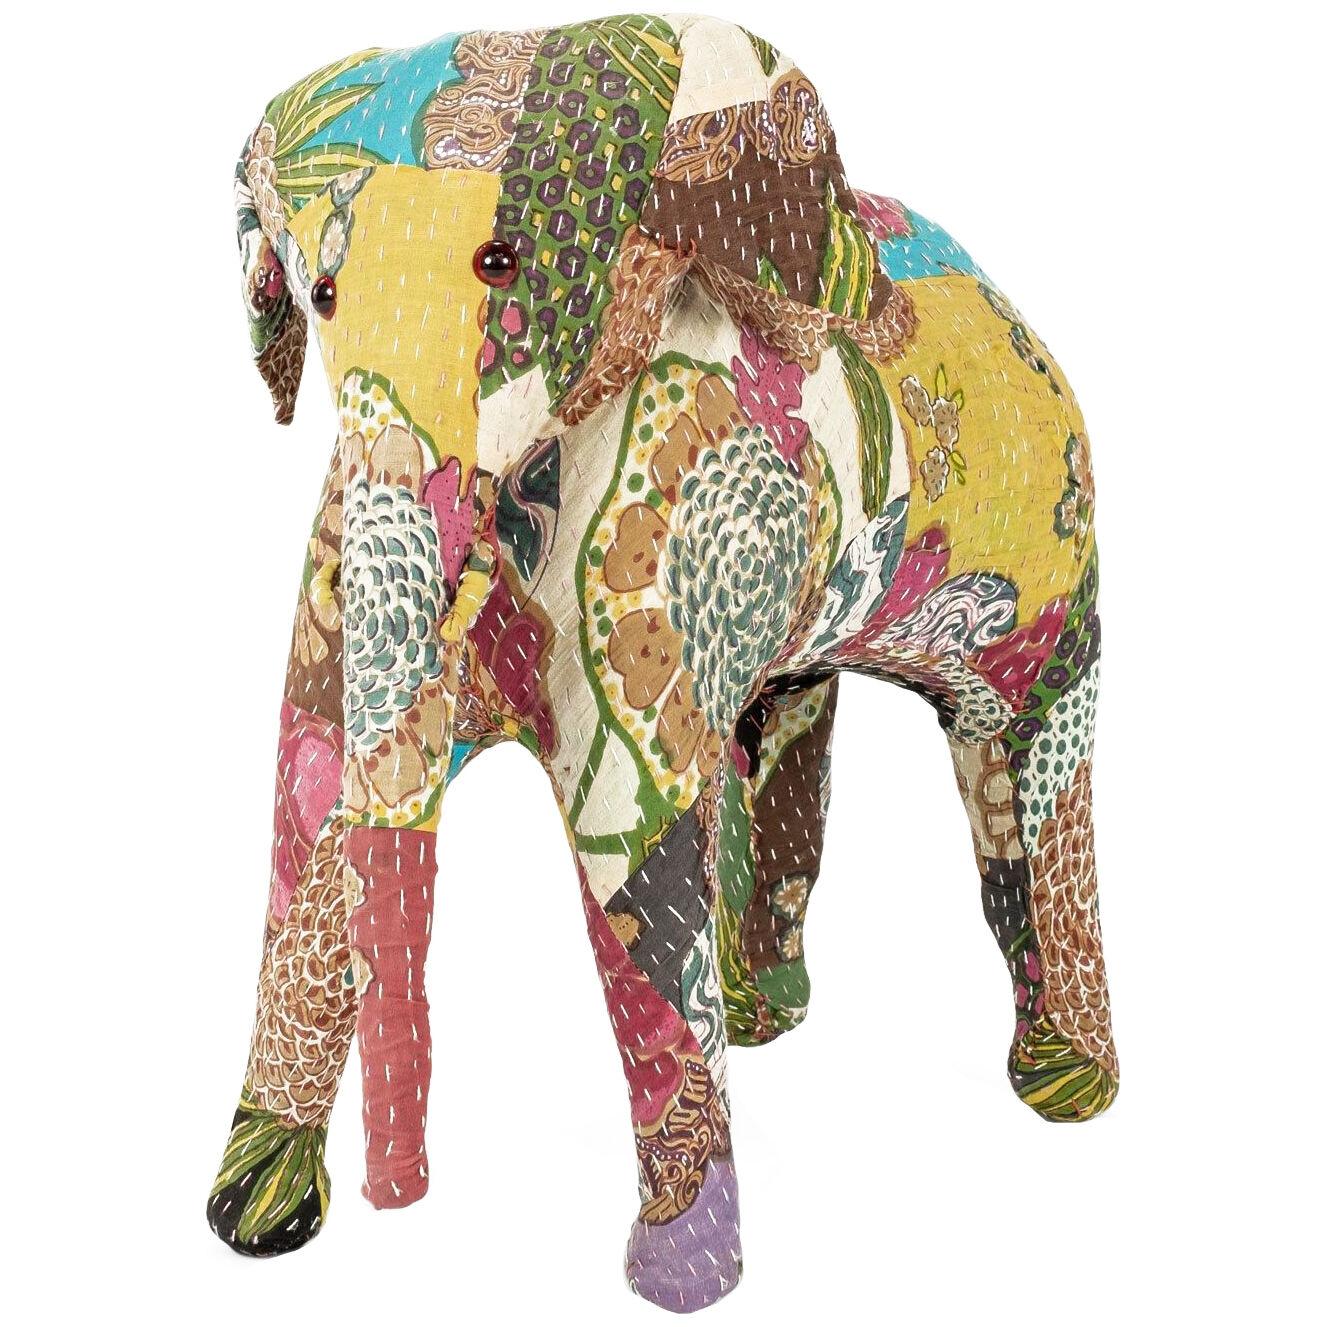 Vintage Cotton Elephant Covered in Indian Textiles